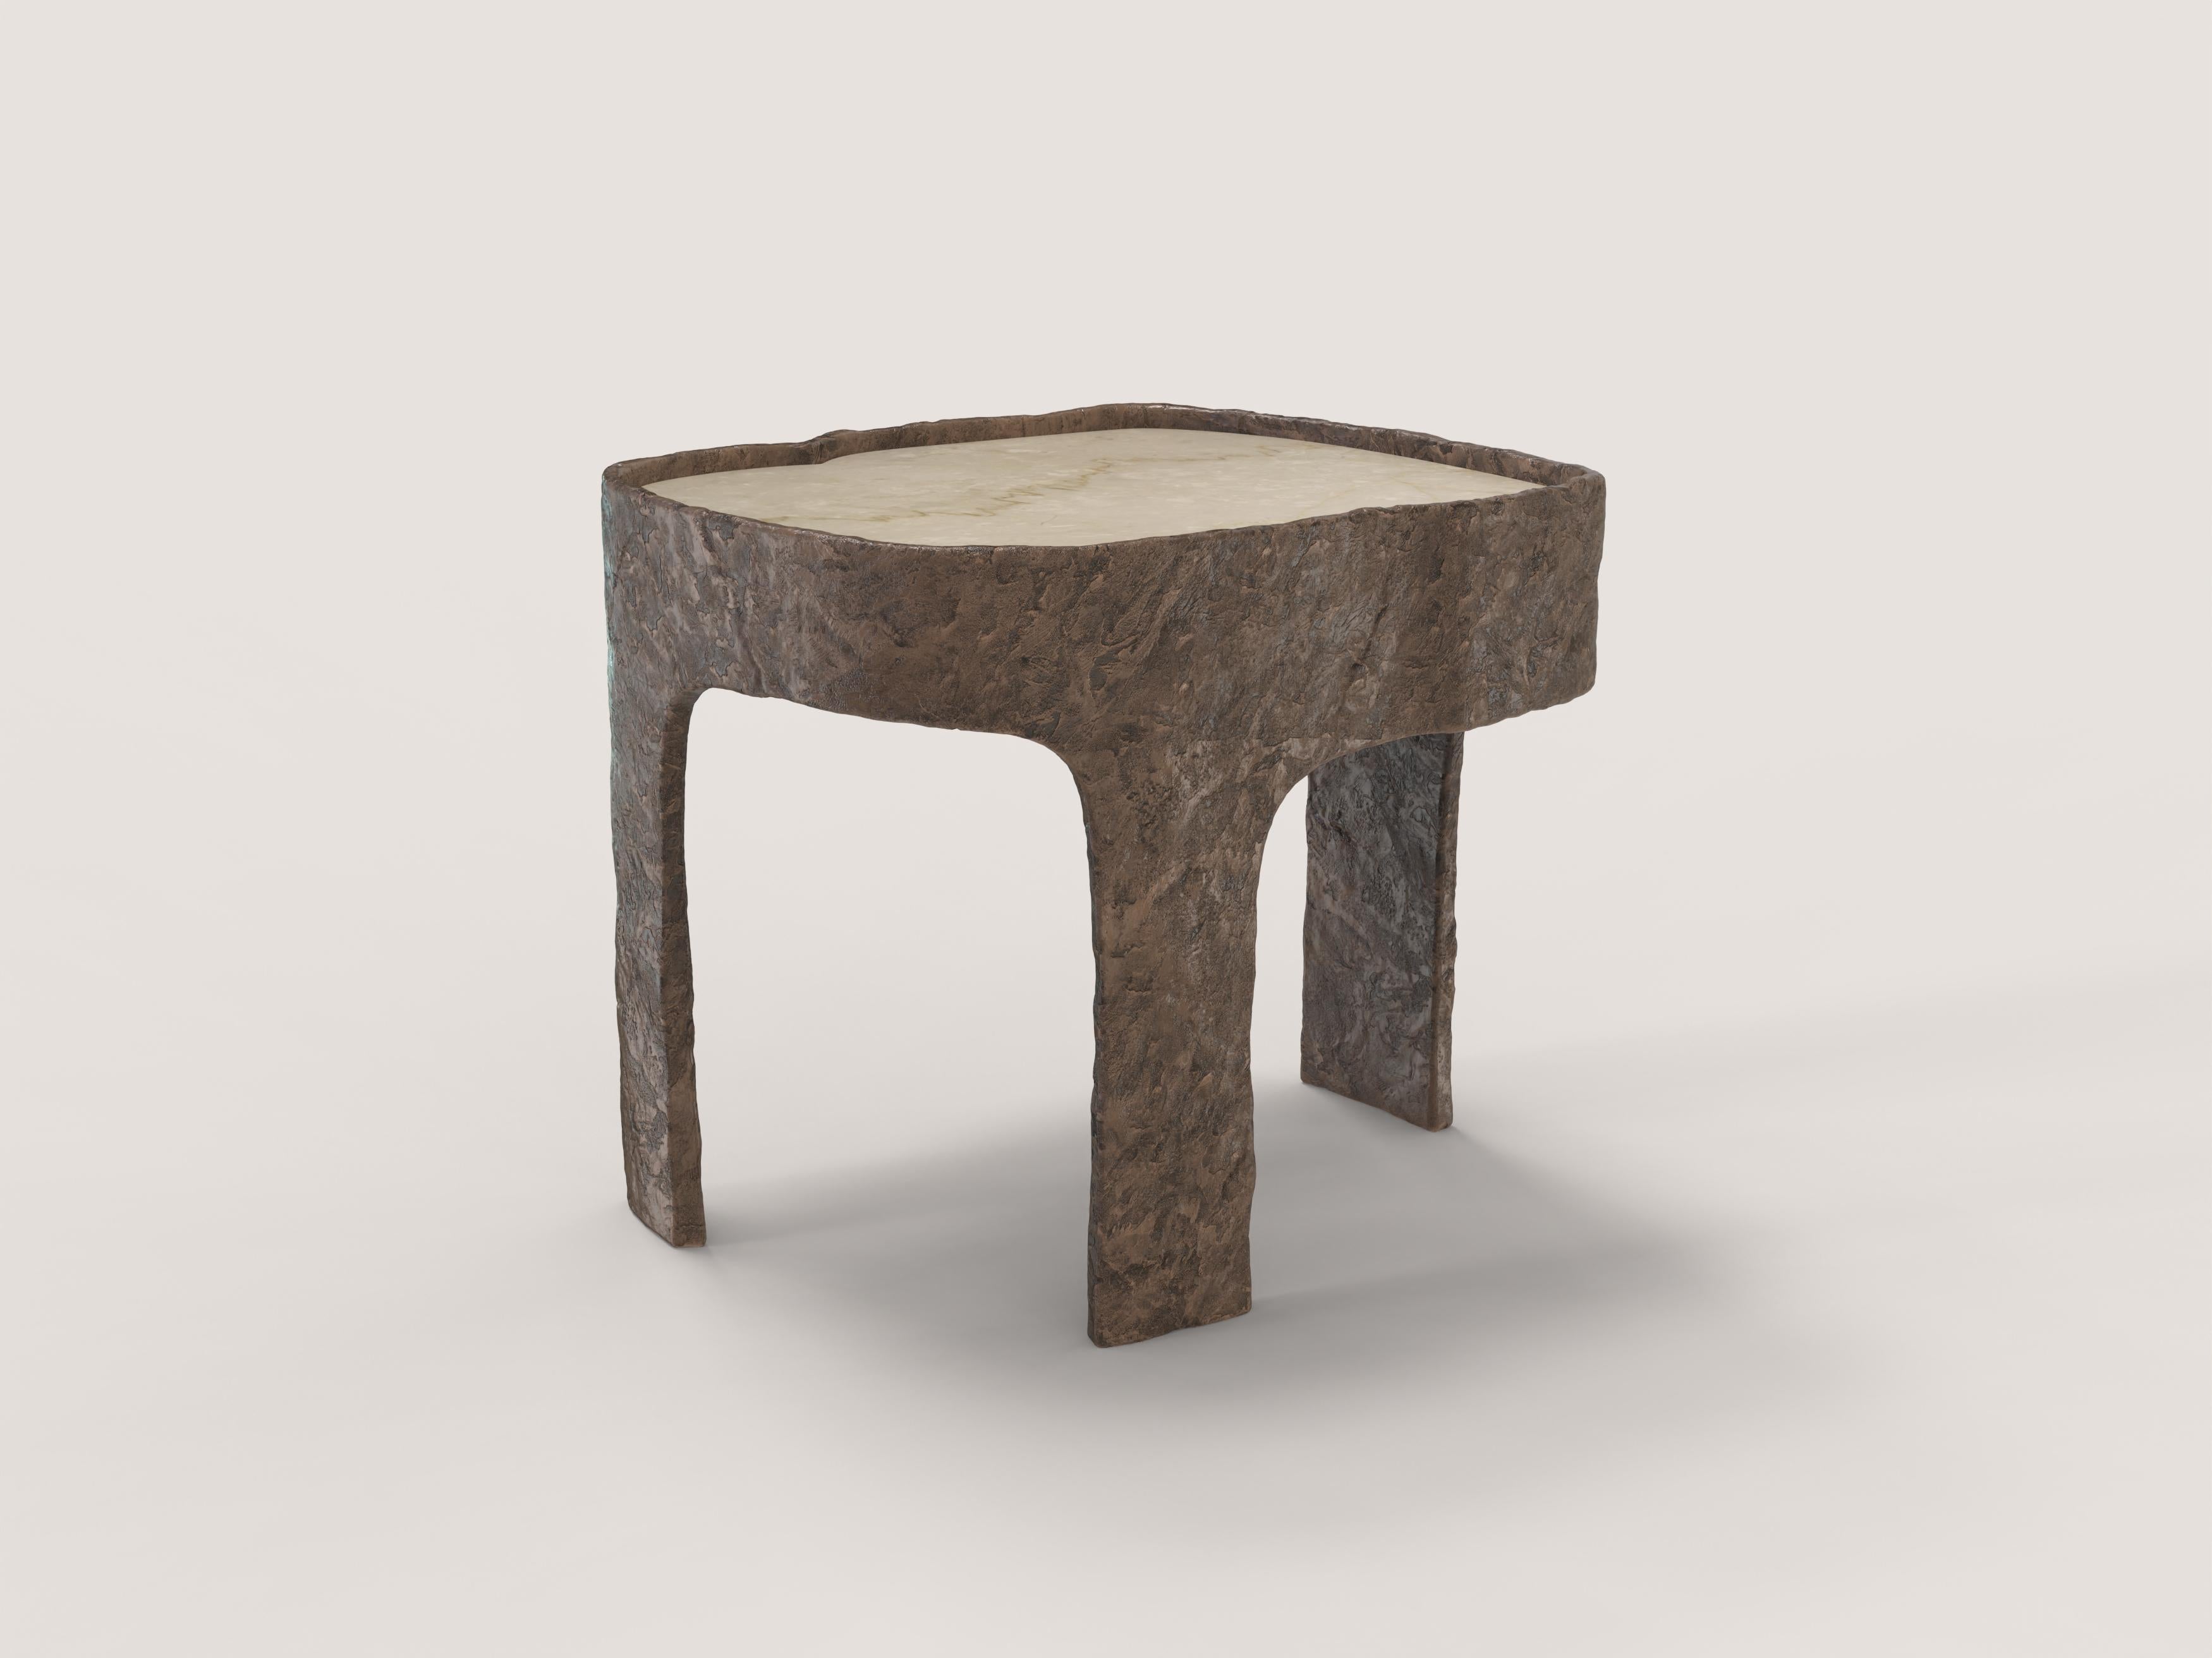 Sumatra V1 is a 21st century side table made by Italian artisans in cast bronze with light brown patina with an extraordinary Botticino Classico marble plane. It is part of the collectible design language Sumatra that has been developed by the